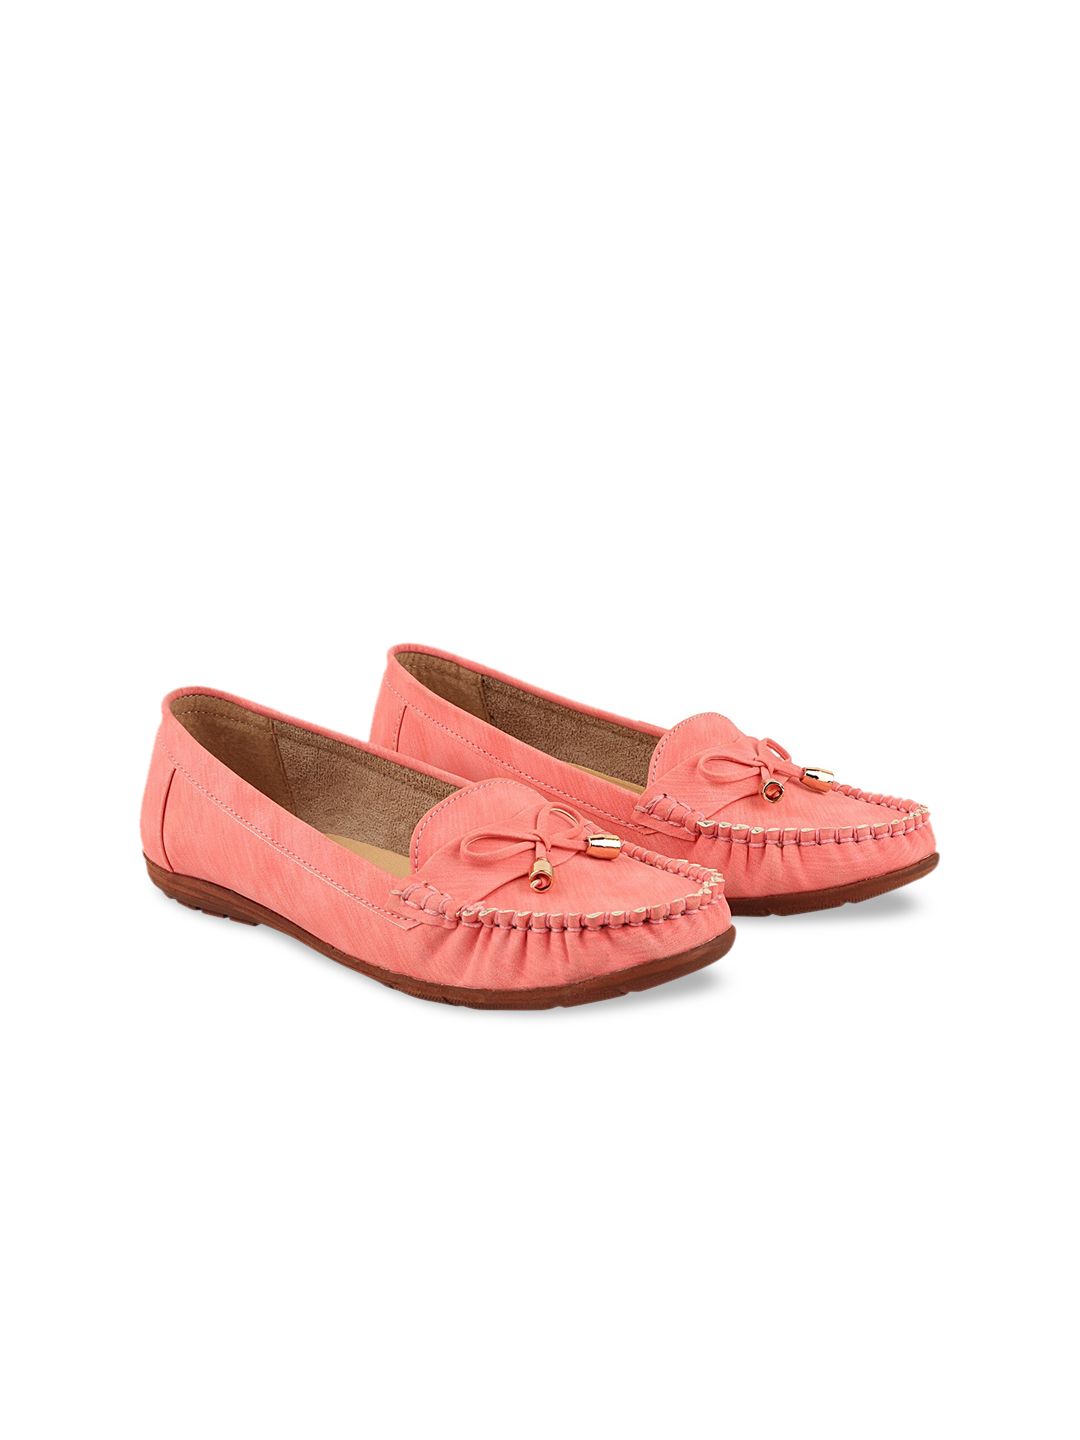 THE WHITE POLE Women Pink Solid Lightweight Loafers with Bow Detail Price in India